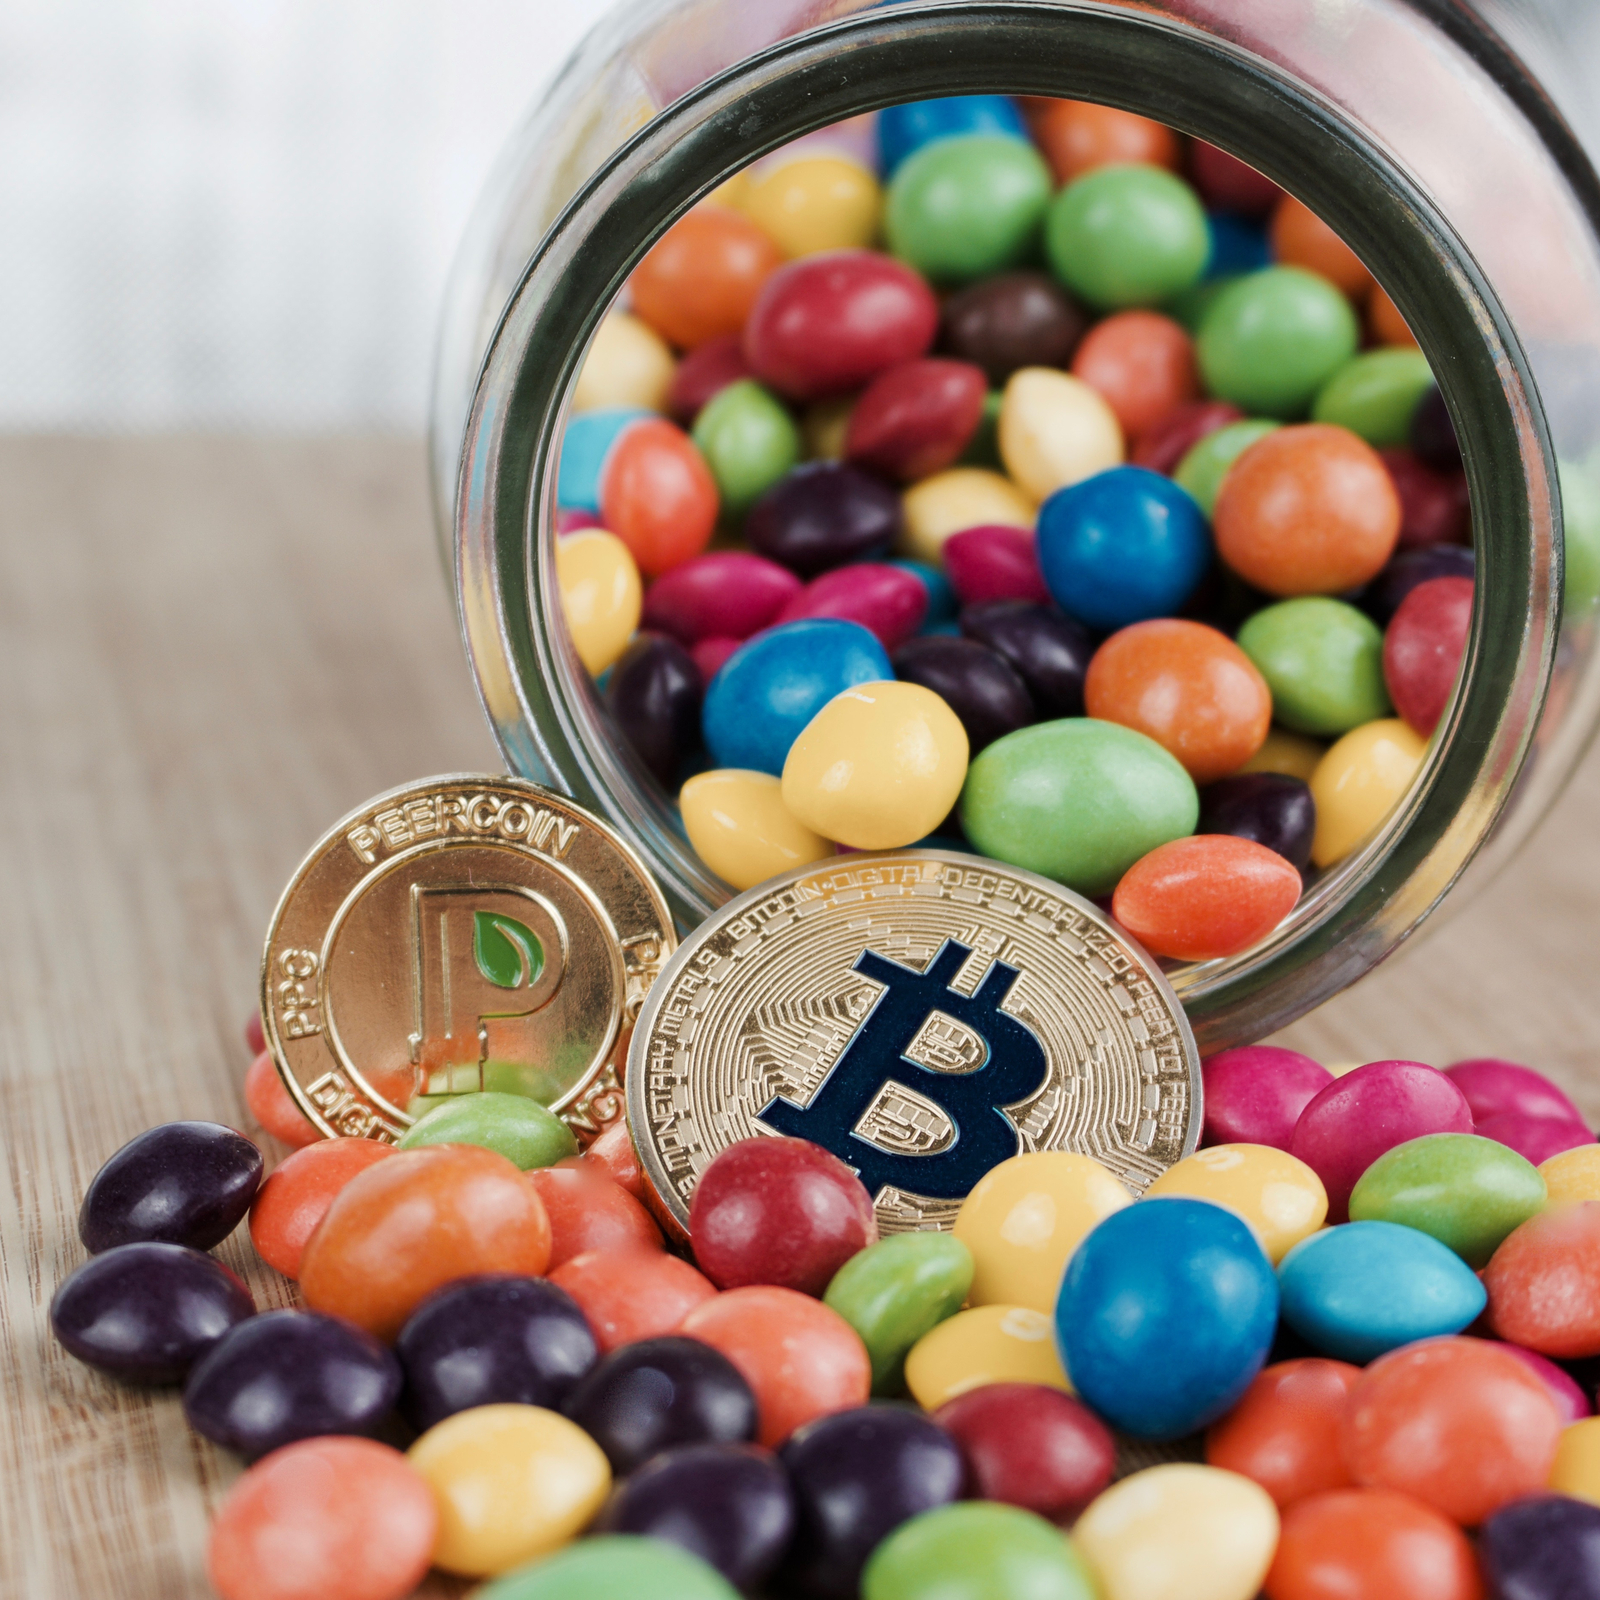 New Year, New Forks: World Bitcoin and Bitcoin Candy are Expected Soon